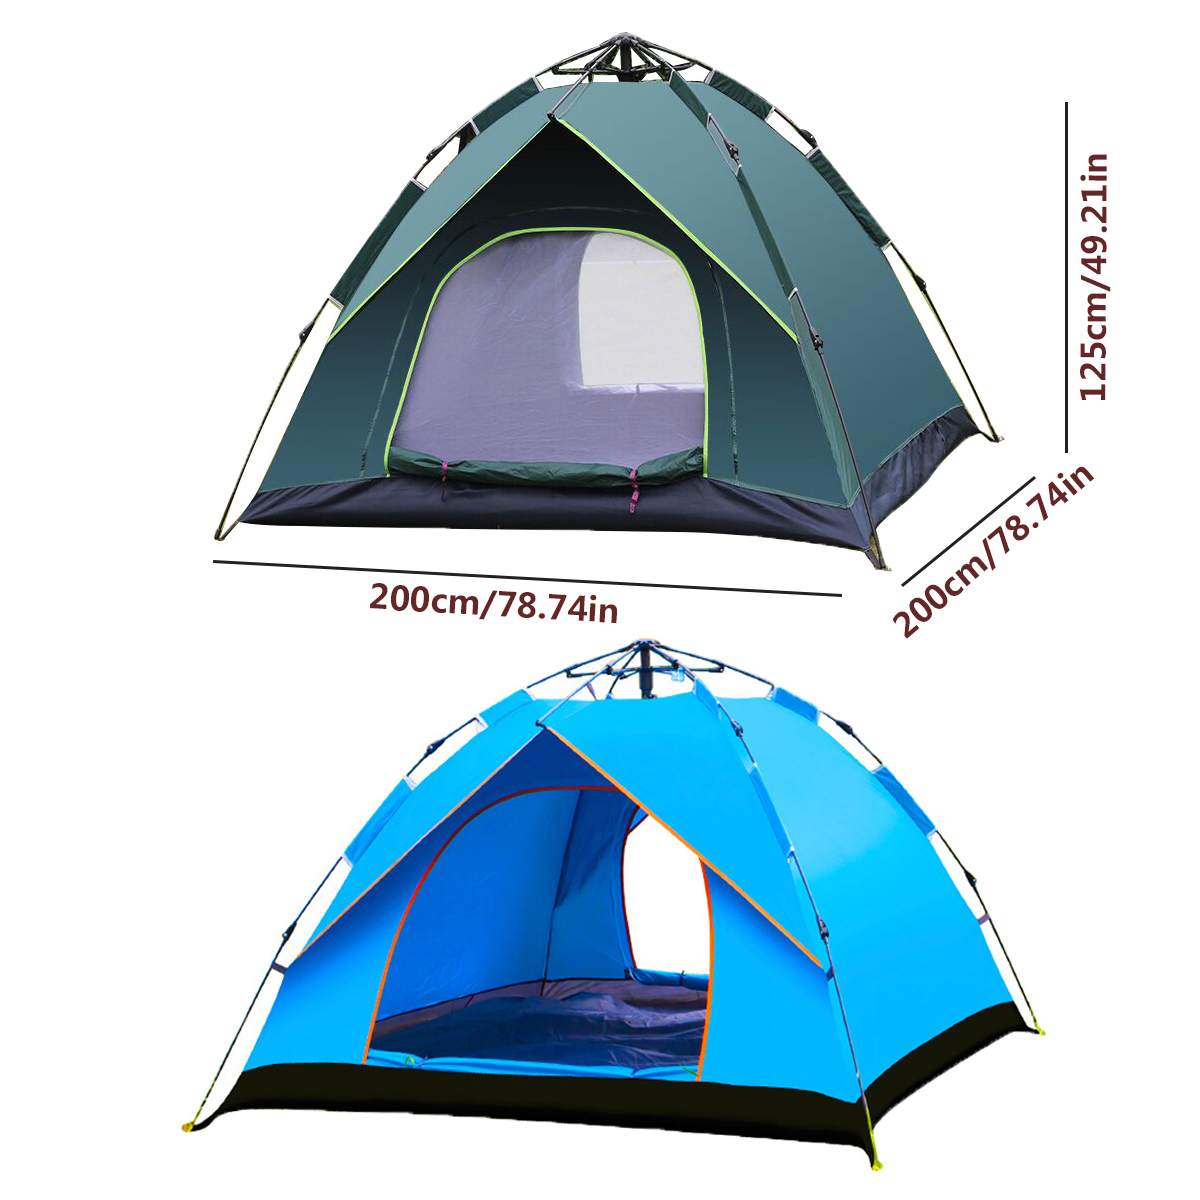 Cheap Goat Tents 3 5 People Large Tent Quick Setup Family Tent Outdoor Waterproof UV Protection Camping Hiking Foldable Folding Tent Family Tents Tents 